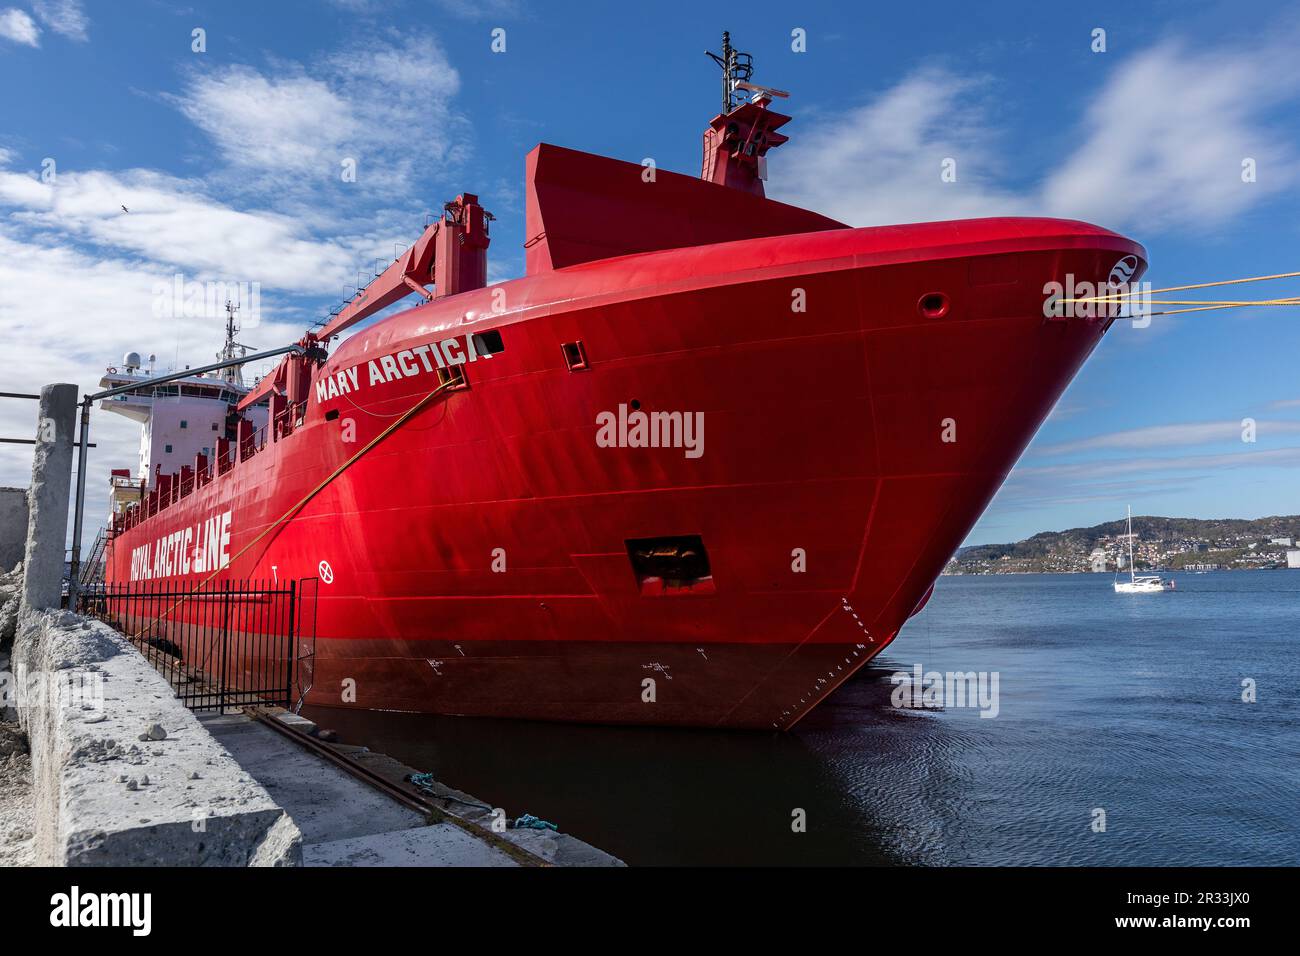 Cargo/container vessel Mary Arctica alongside quay in Laksevaag, in the port of Bergen, Norway. Stock Photo